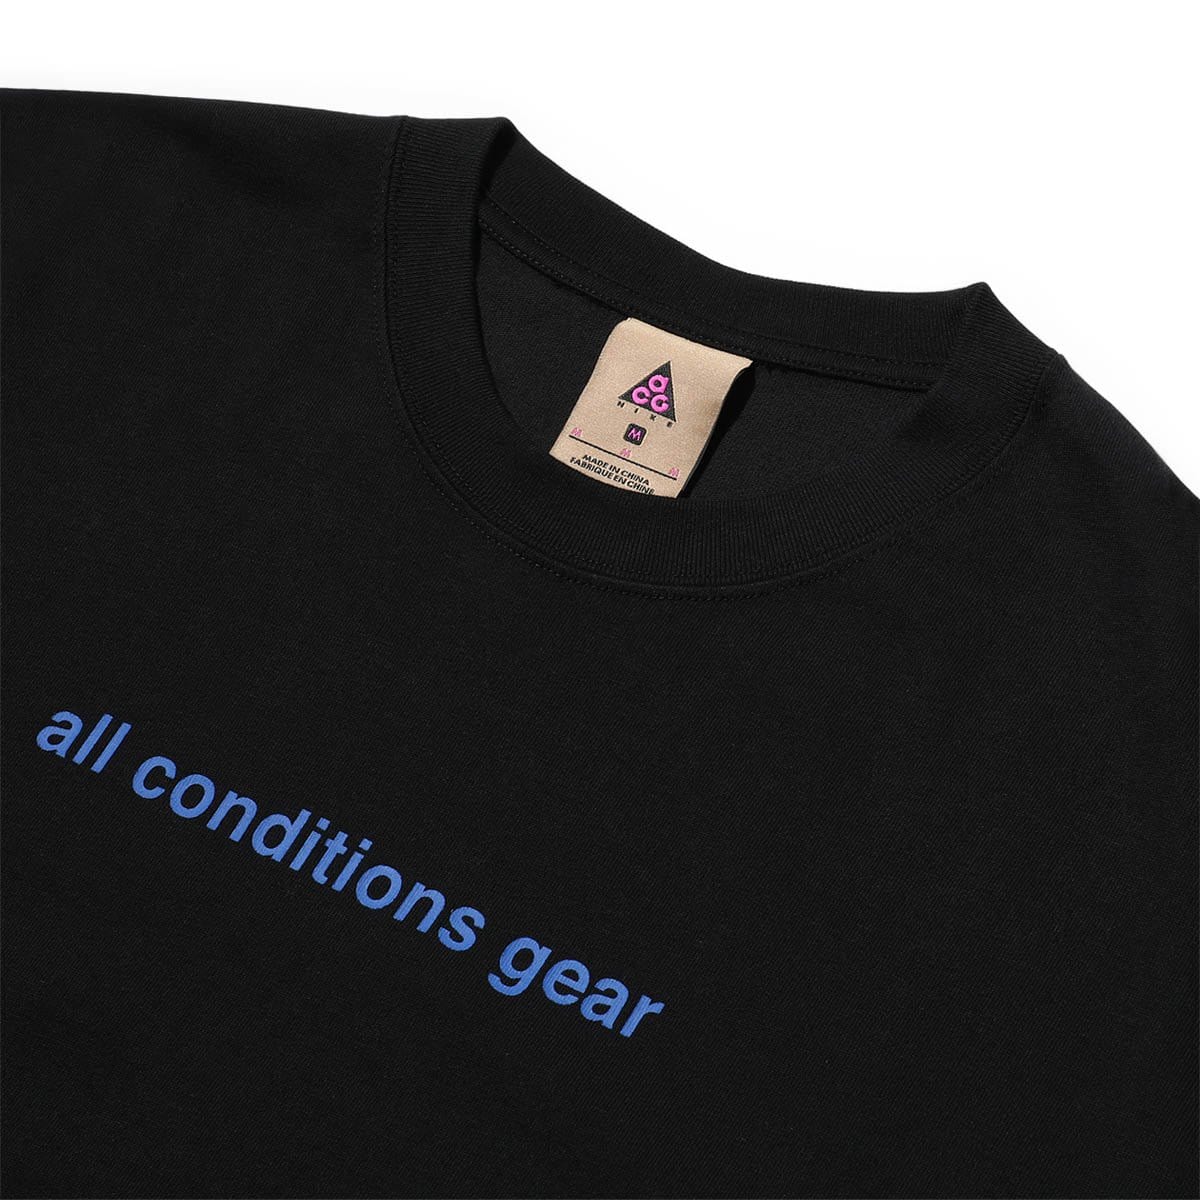 all conditions gear shirt